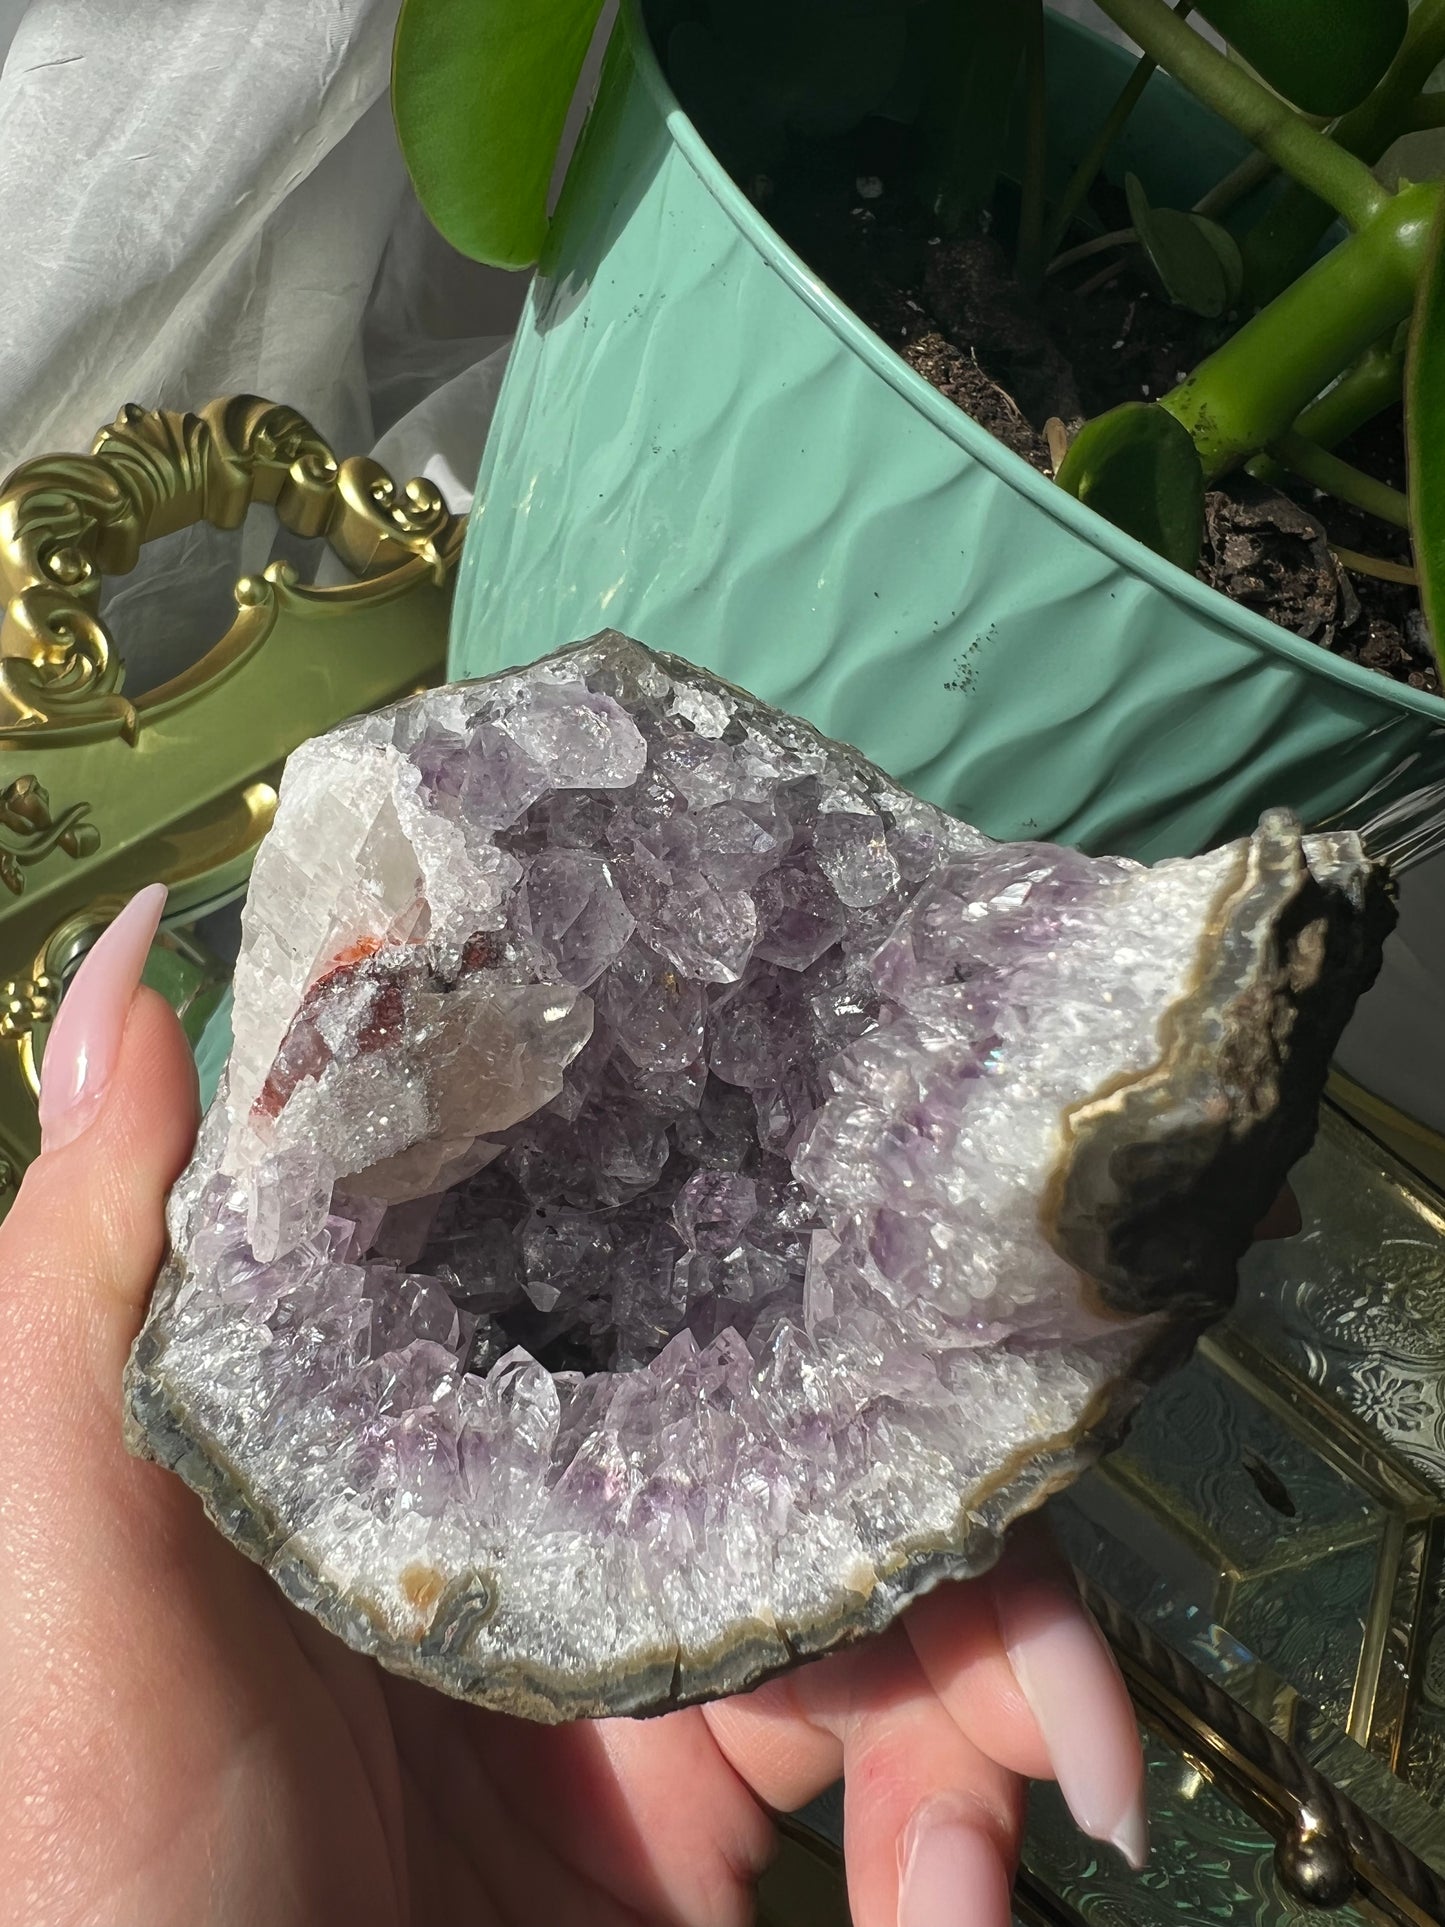 Amethyst Geode With Calcite